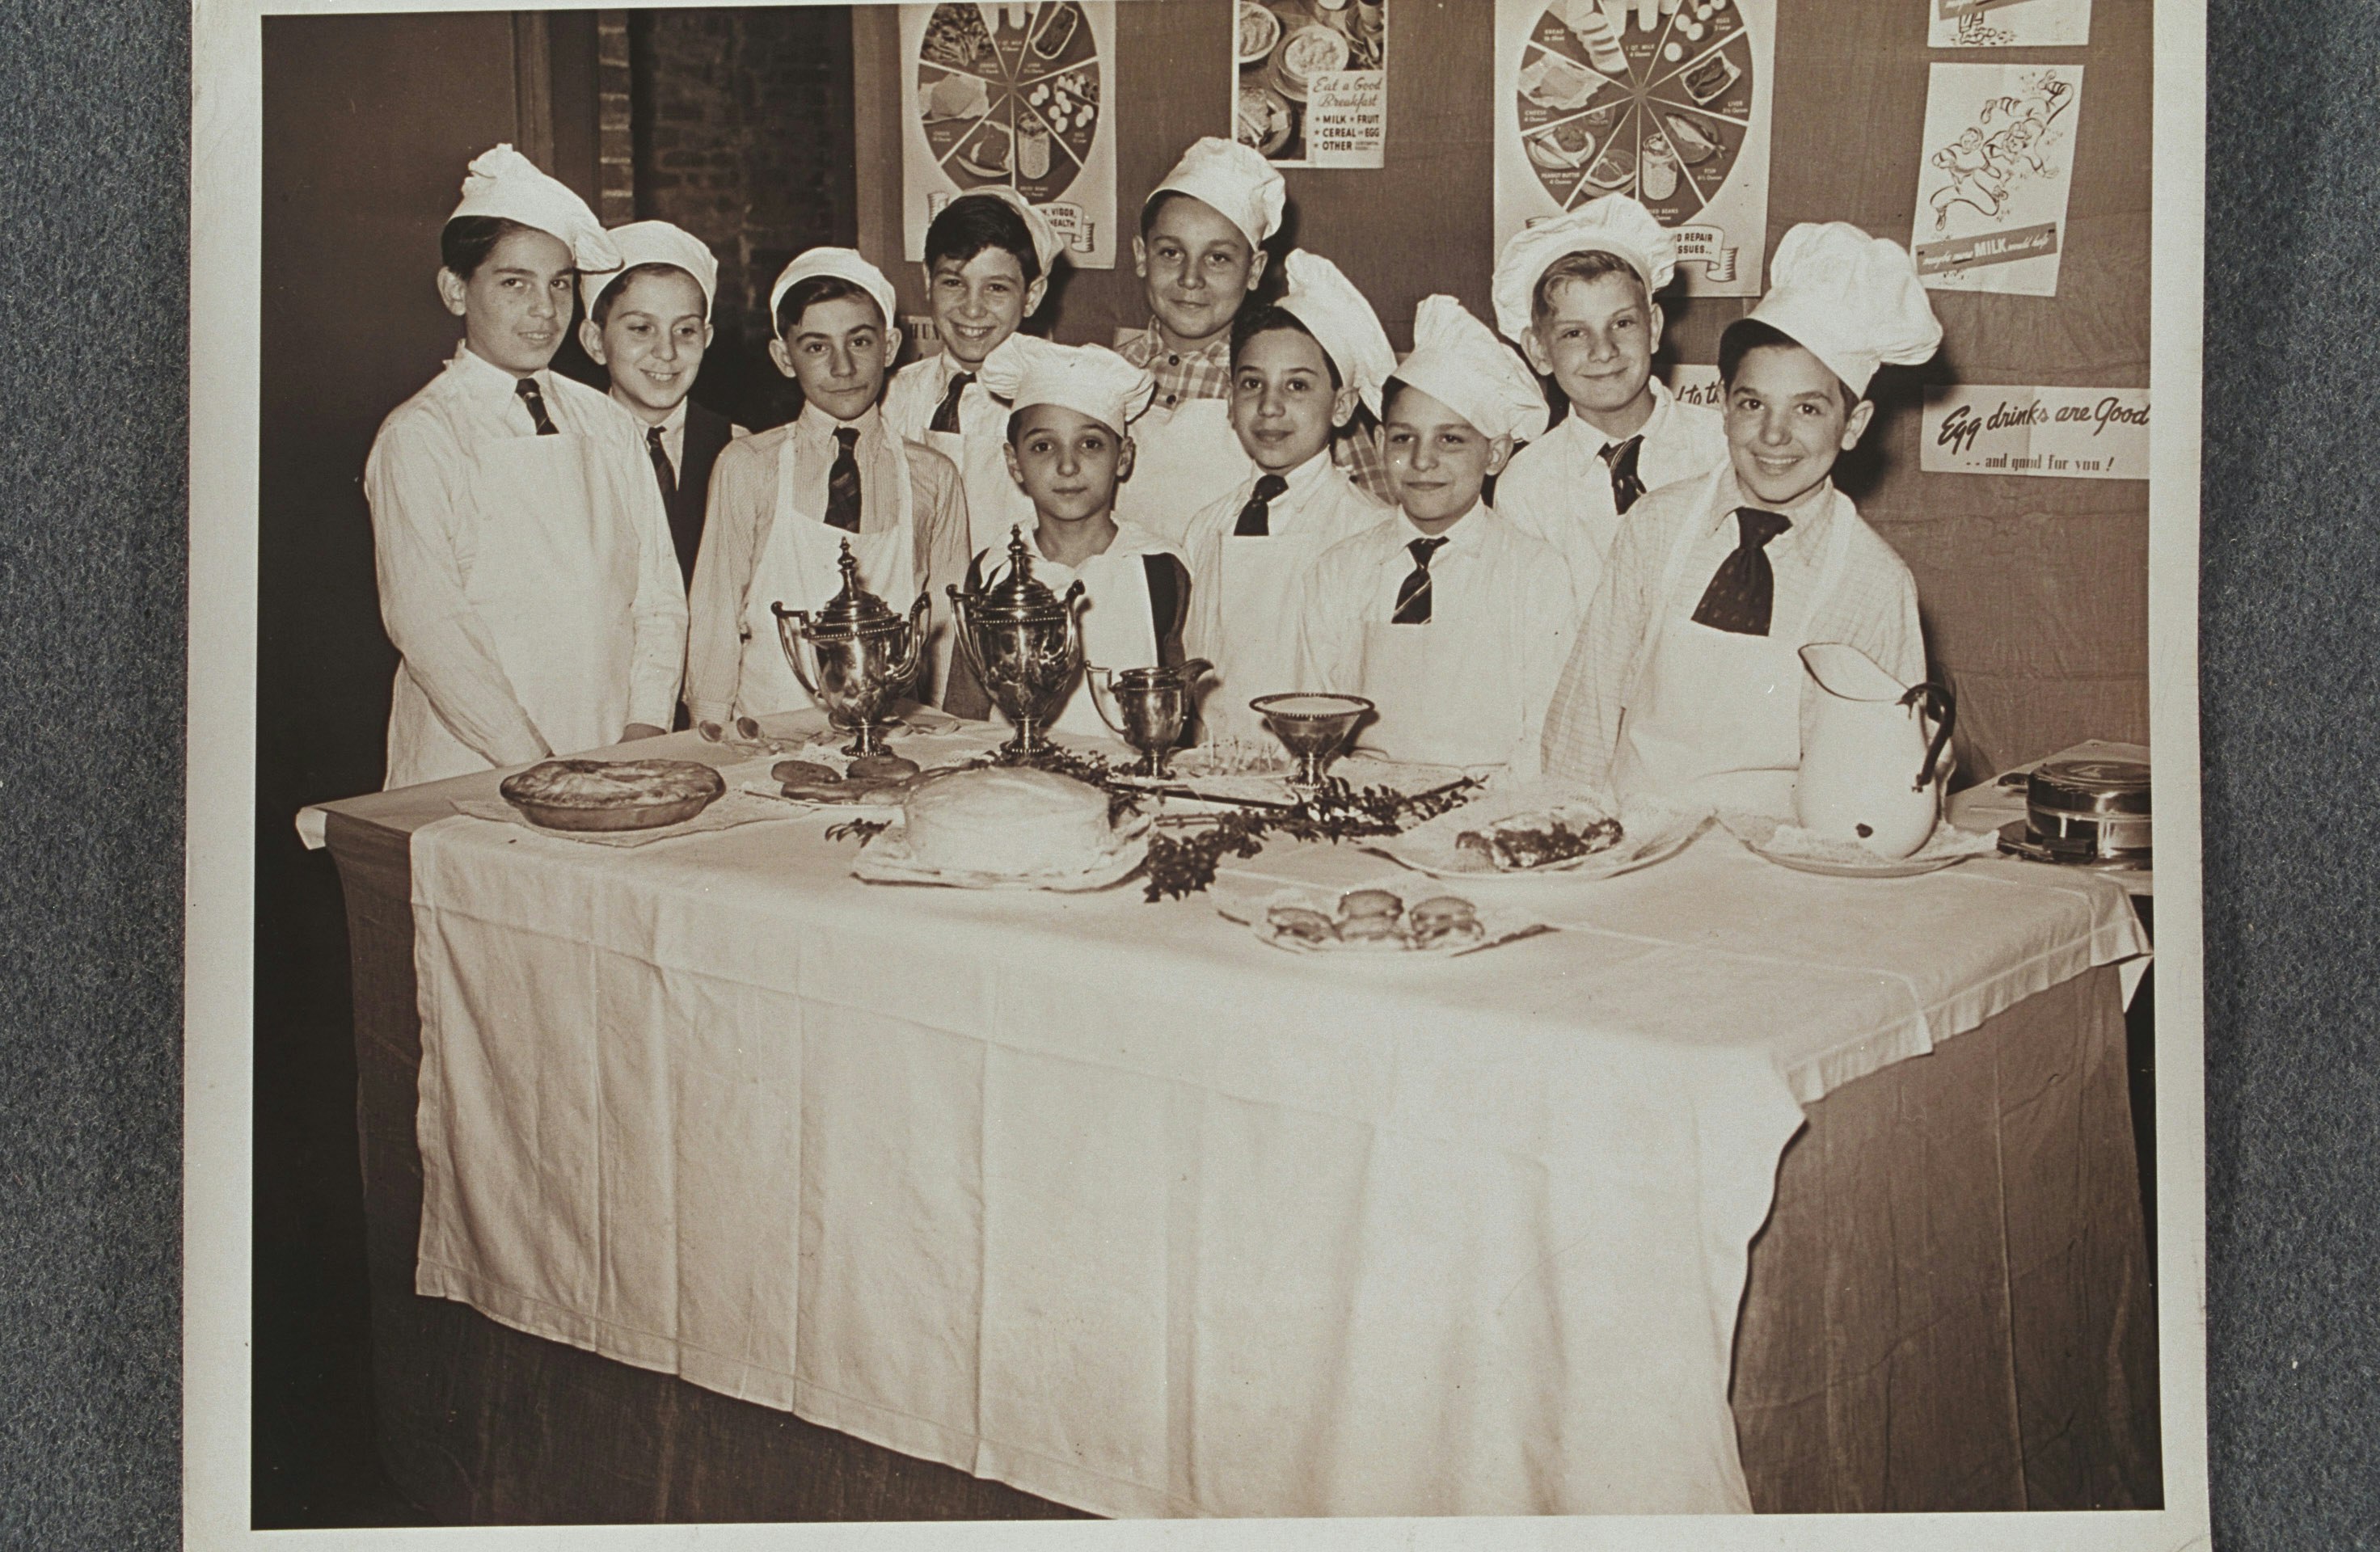 Portrait of ten boys in cooking class, standing in front of nutrition poster display and behind table of food